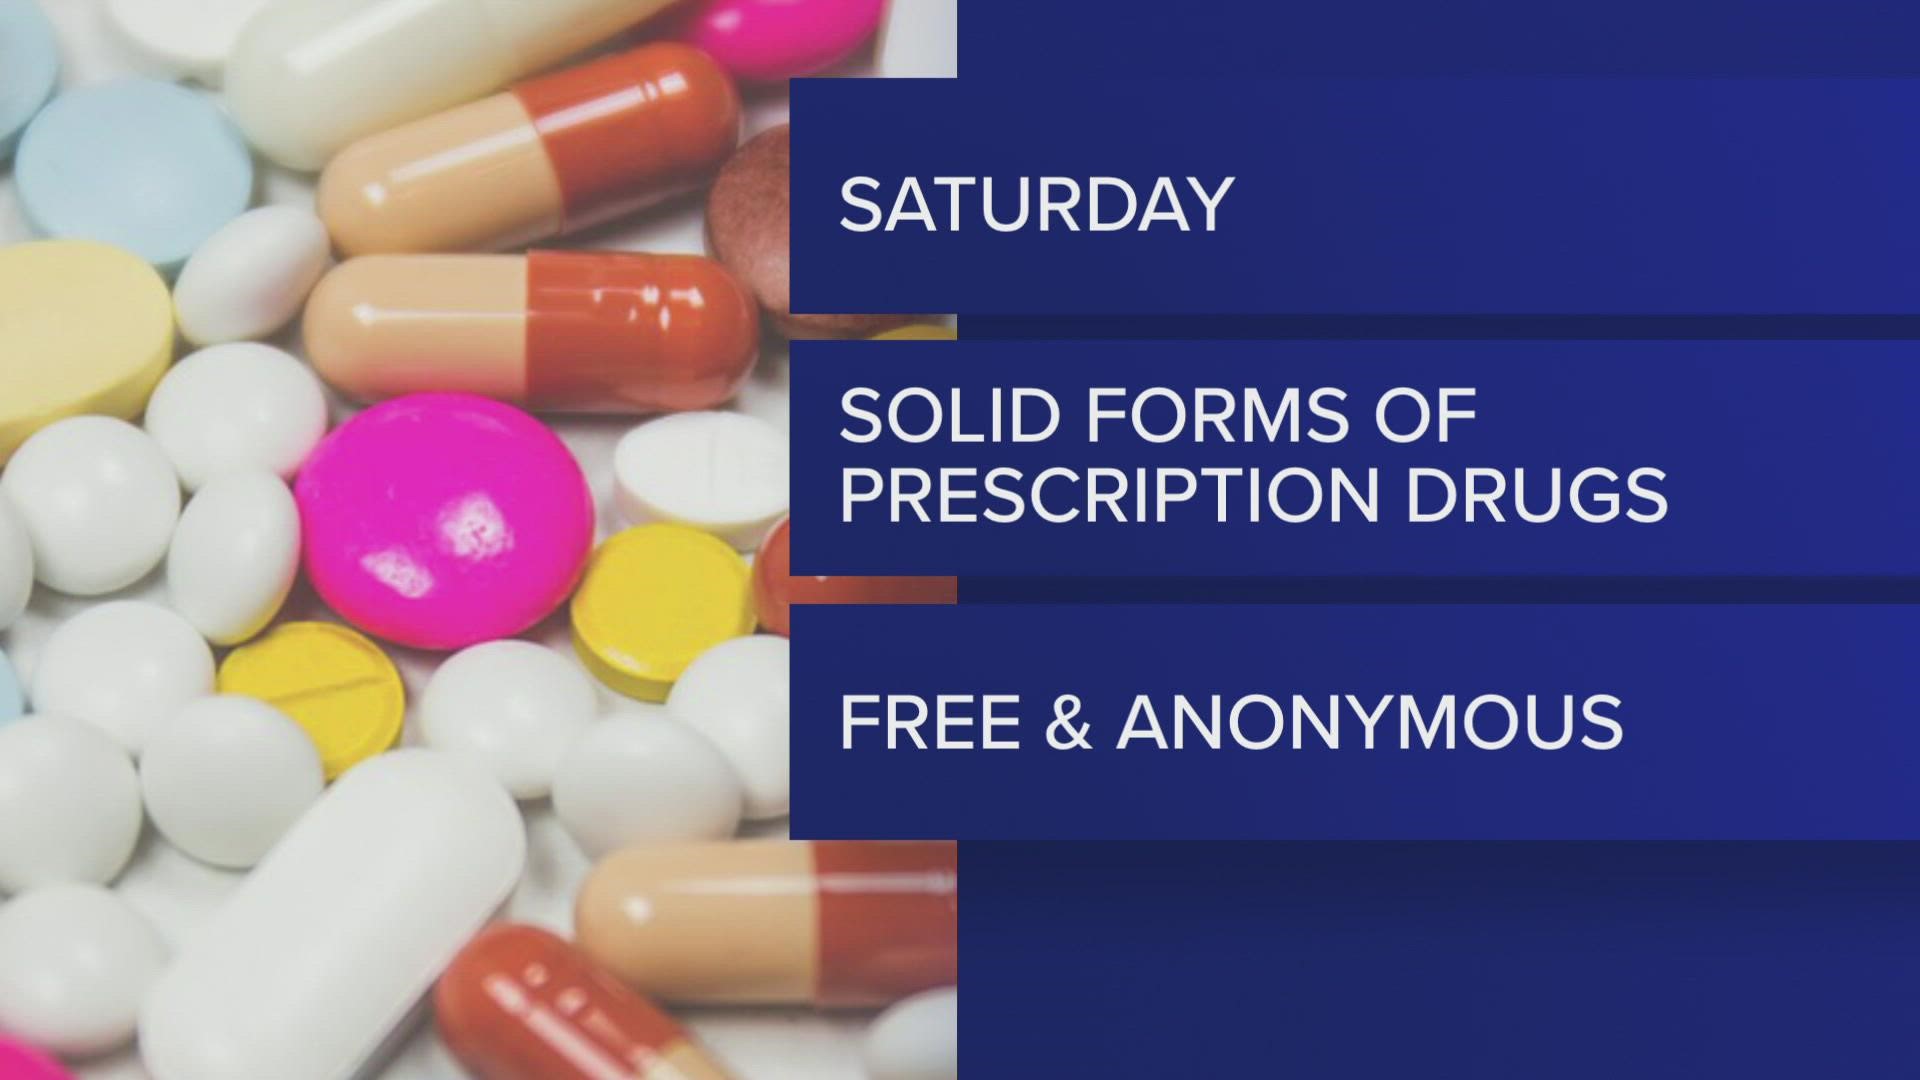 National Prescription Drug Take Back Day is Saturday from 10 a.m. to 2 p.m. Here's where to drop them off and what you can and can't bring.